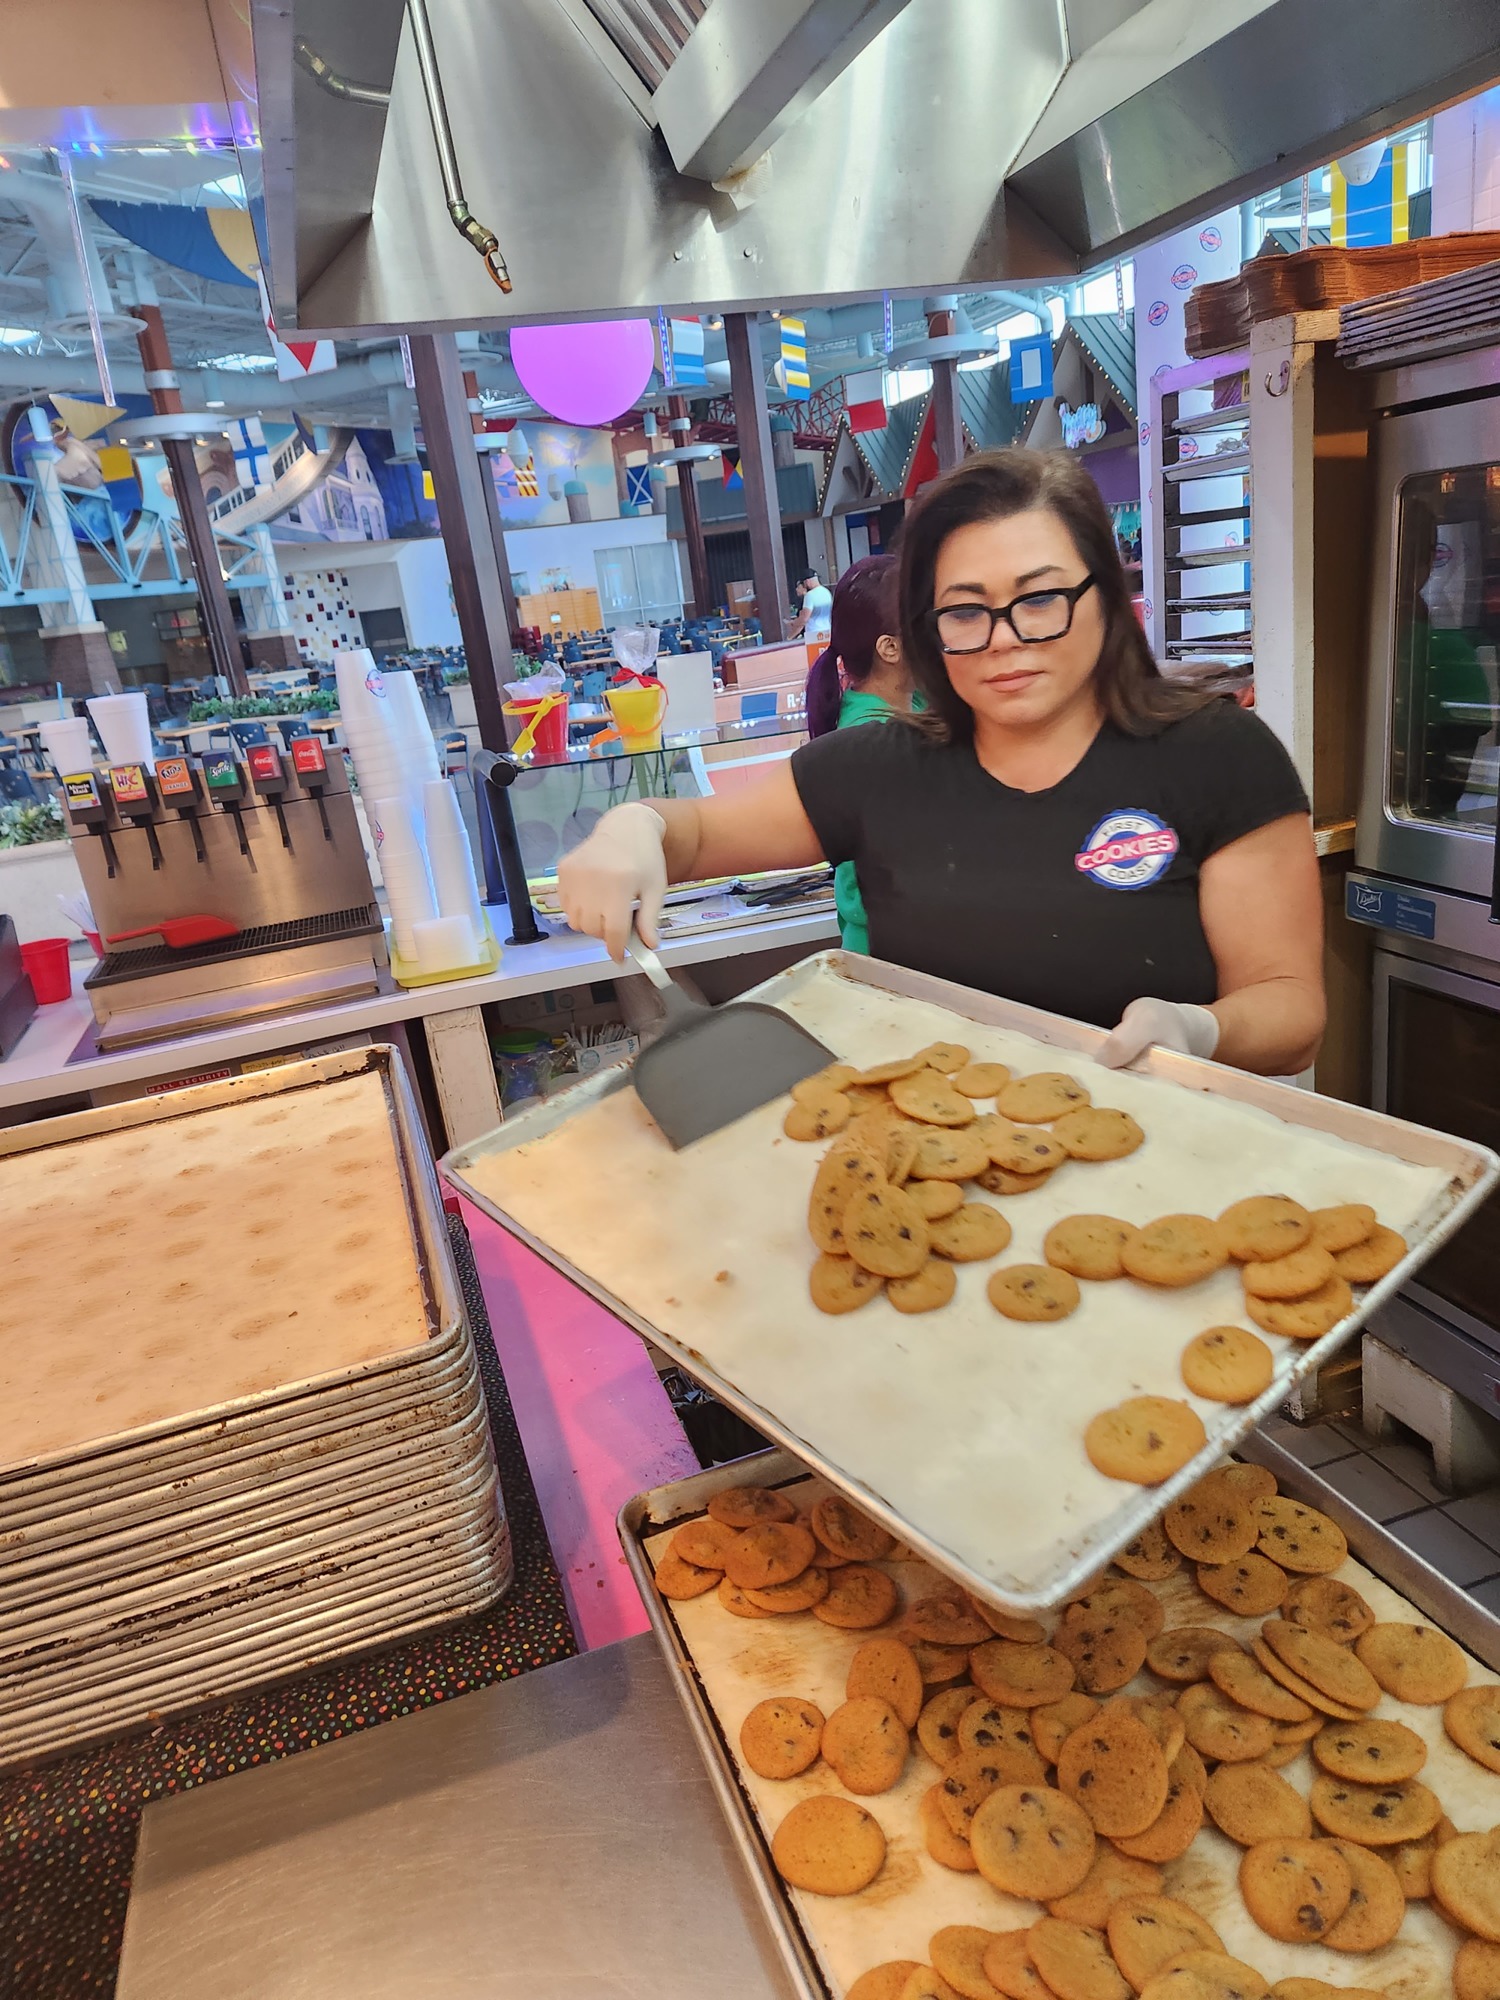 Michelle Rhoades, owner of First Coast Cookies in Regency Square Mall, bought the equipment from Coastal Cookies after it closed at the Jacksonville Landing.